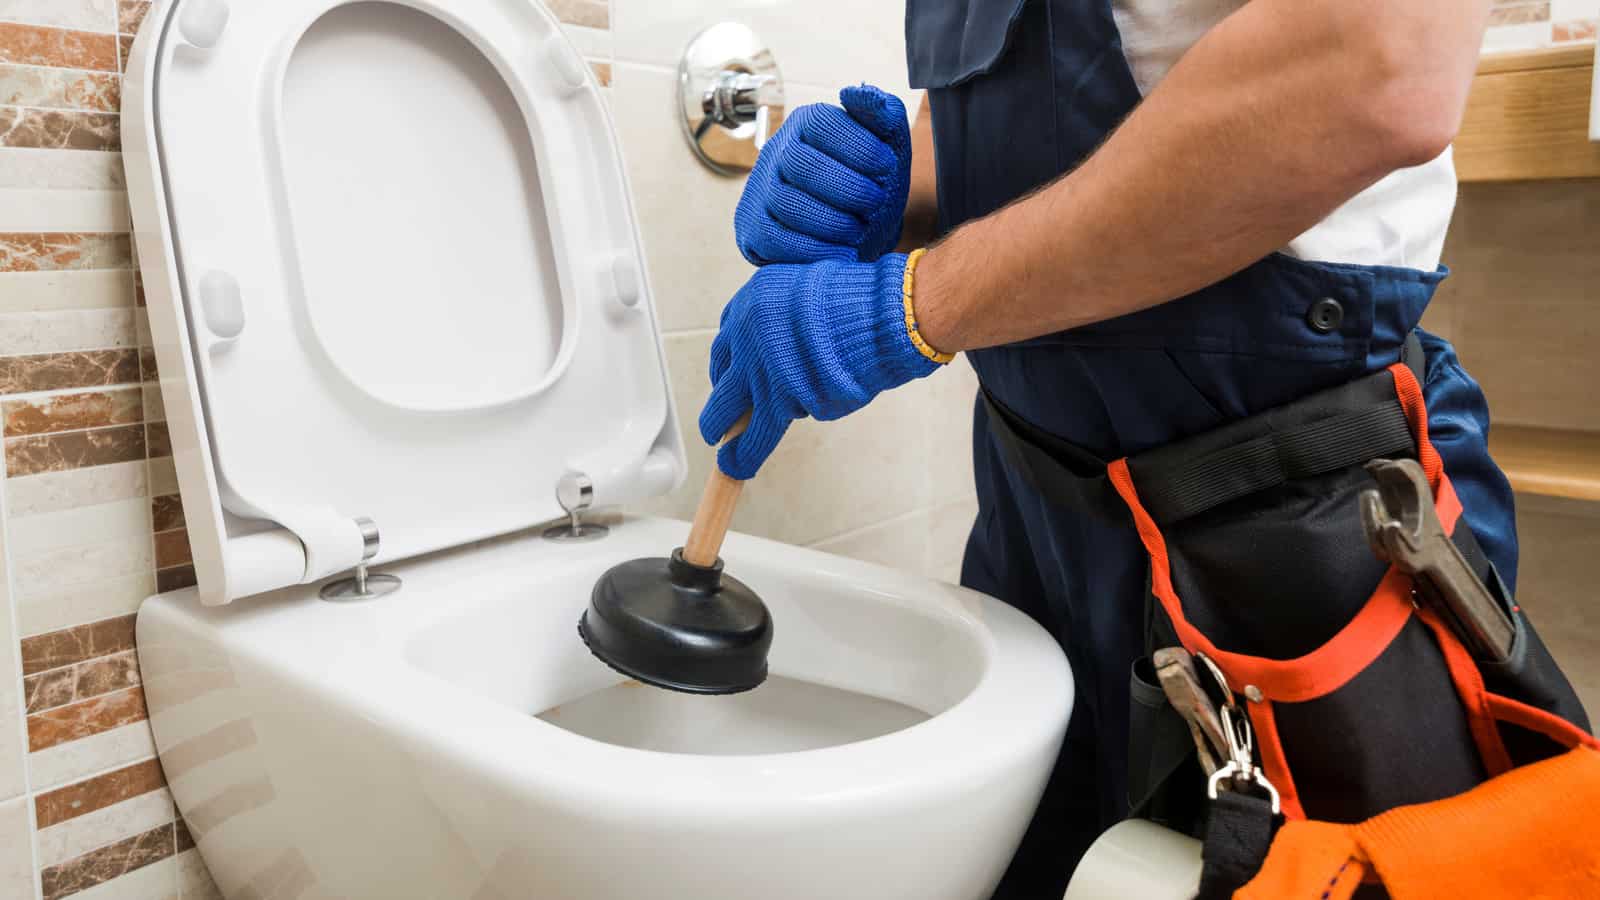 Advanced Sewer and Drain Cleaning LLC of Toledo